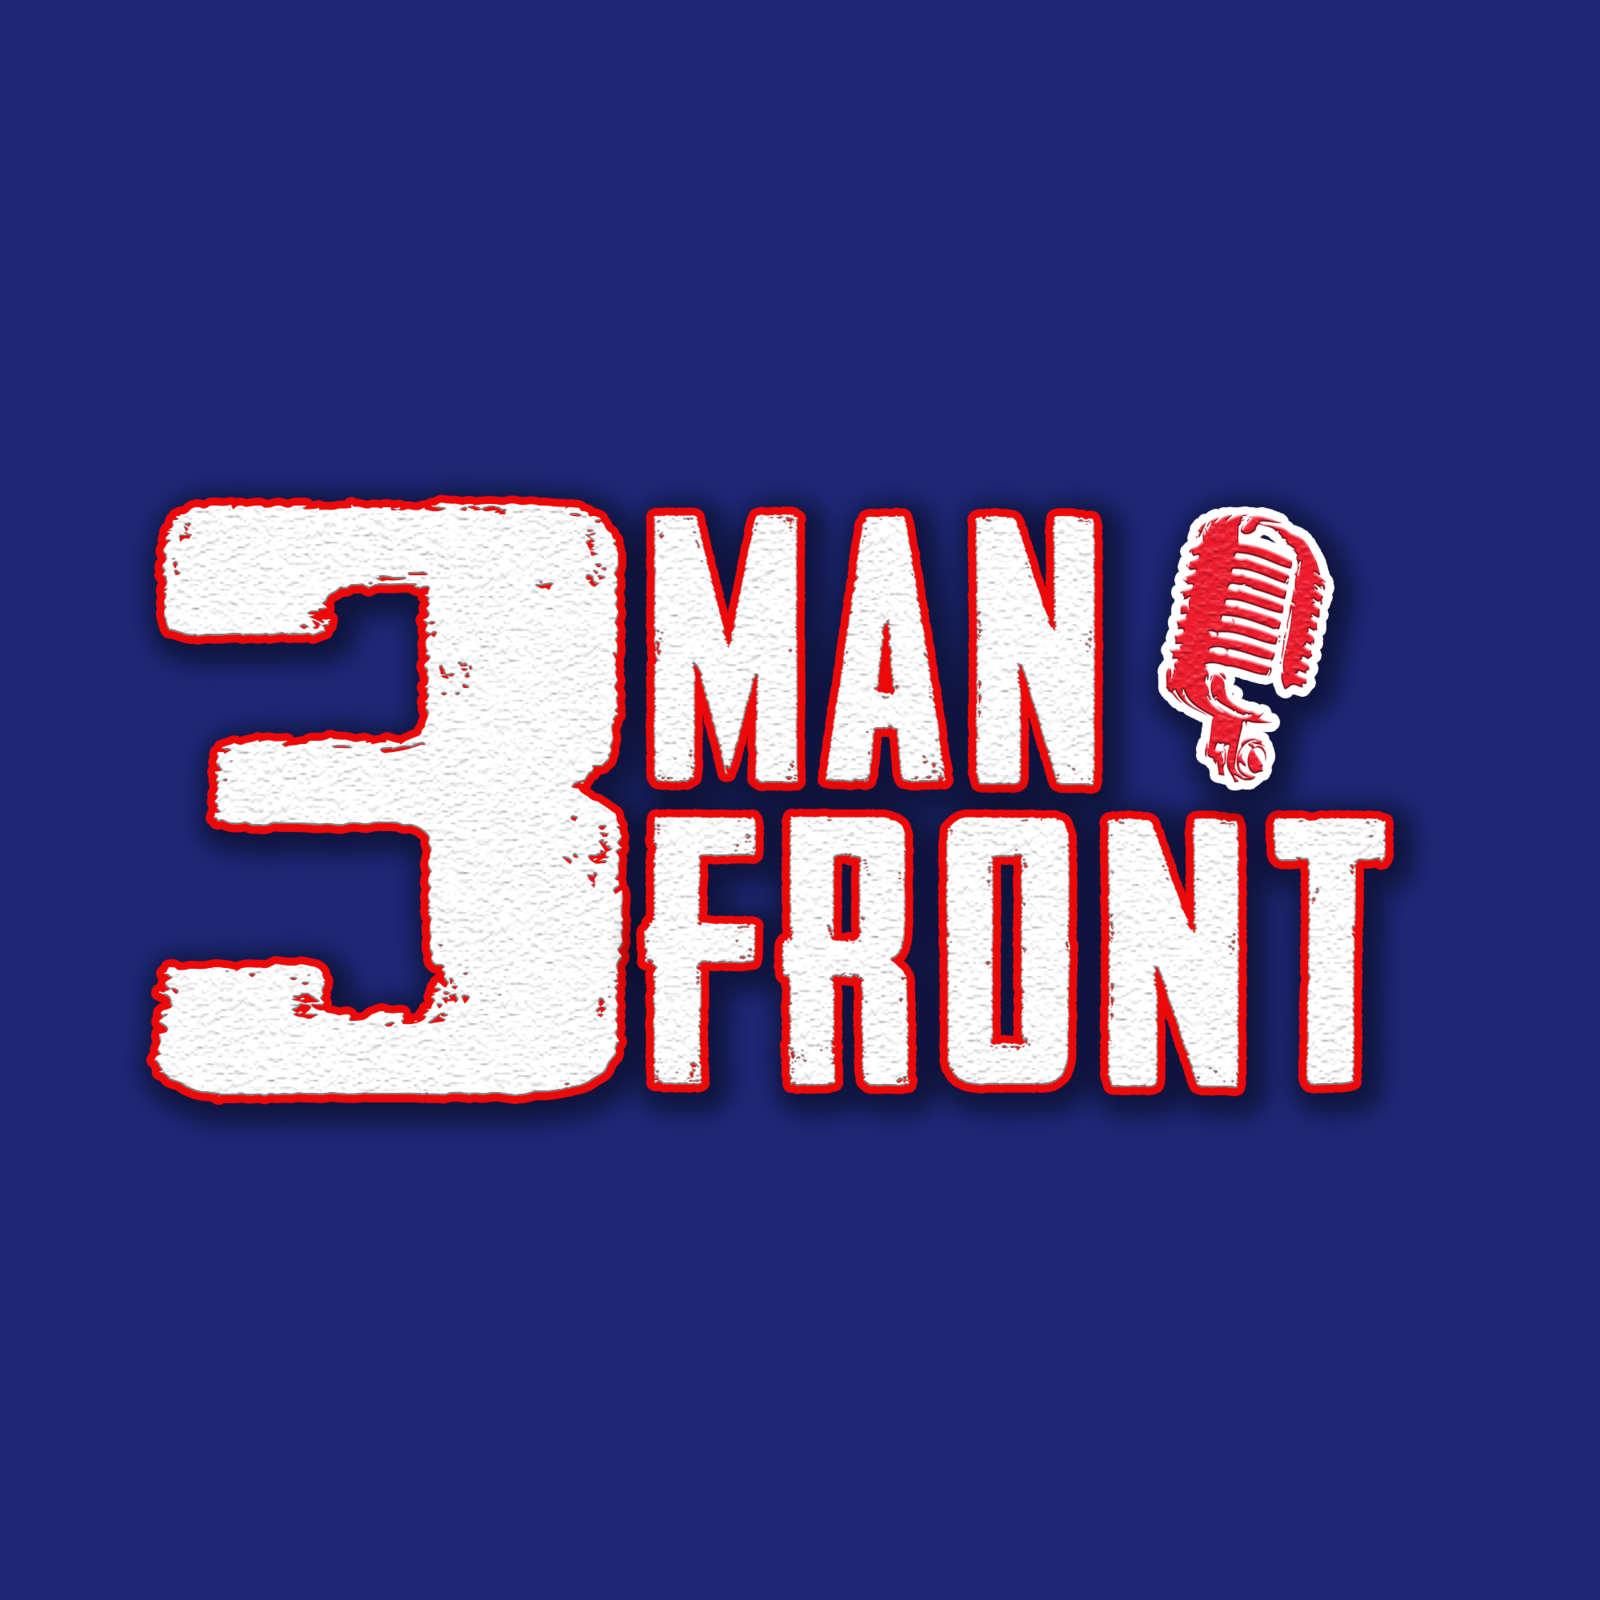 6-7-24 3 Man Front Hour 4: Great athletes we despise, Today in History & texts